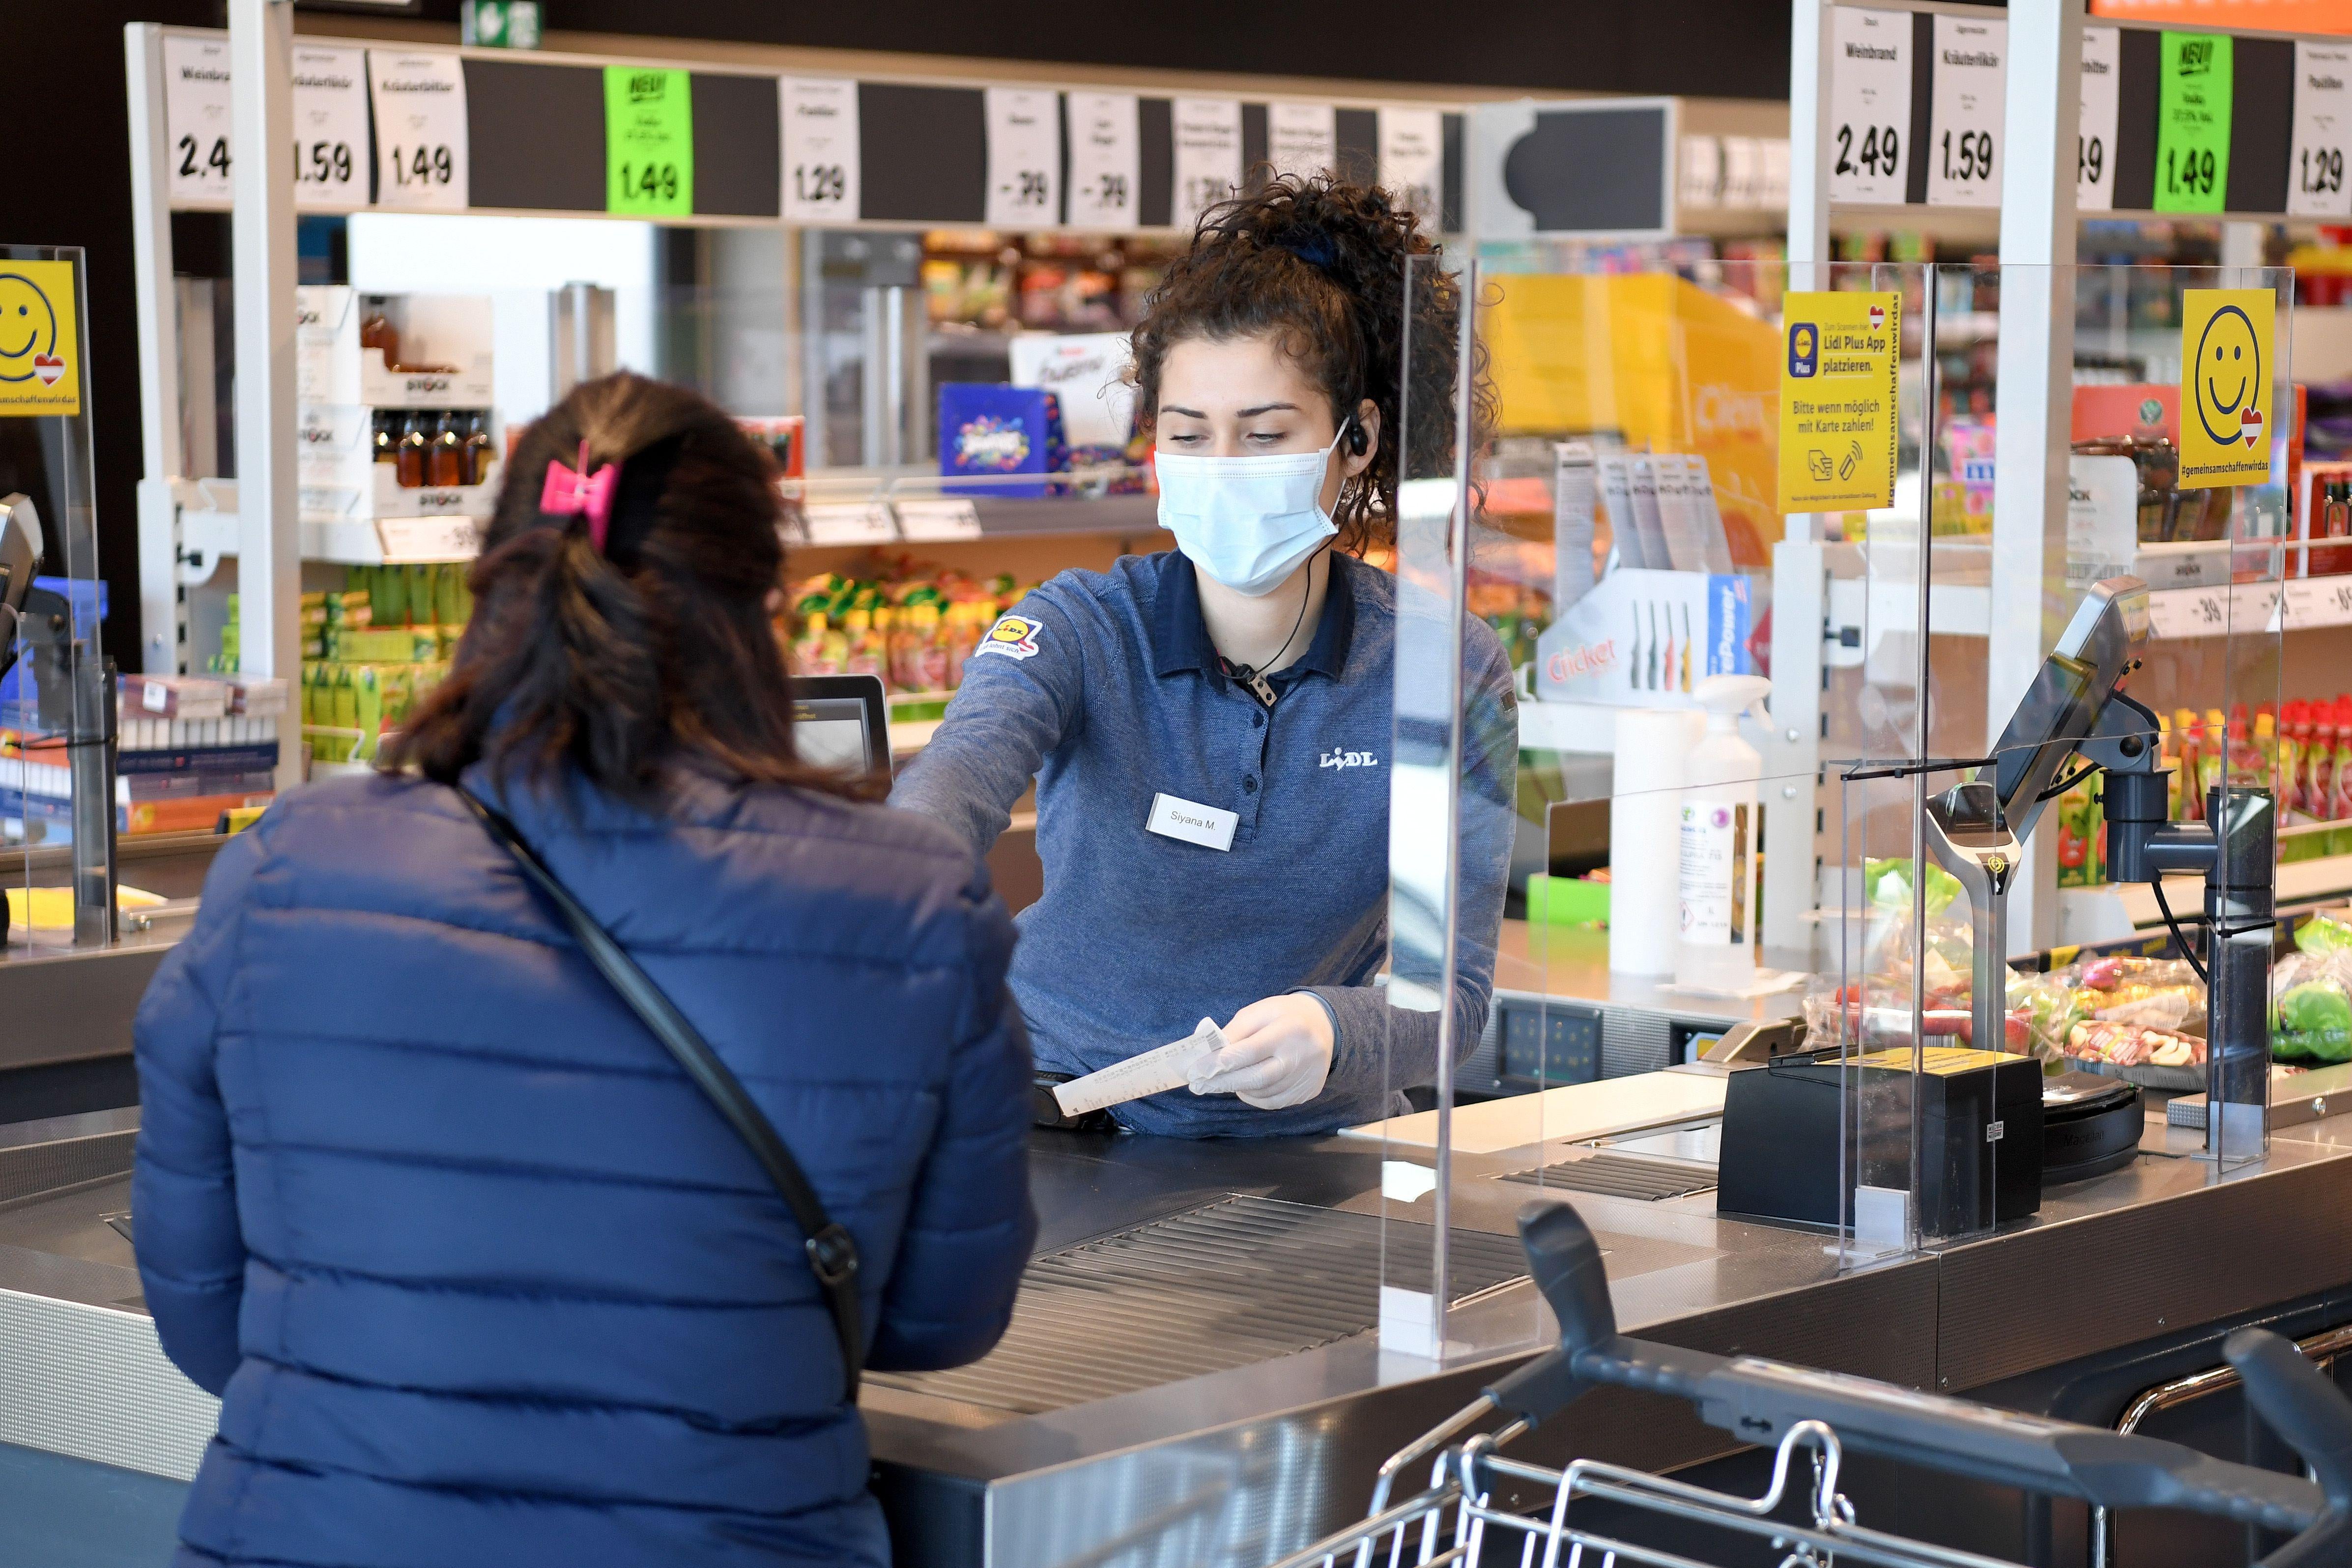 A woman behind a counter wears a mask while helping a customer.